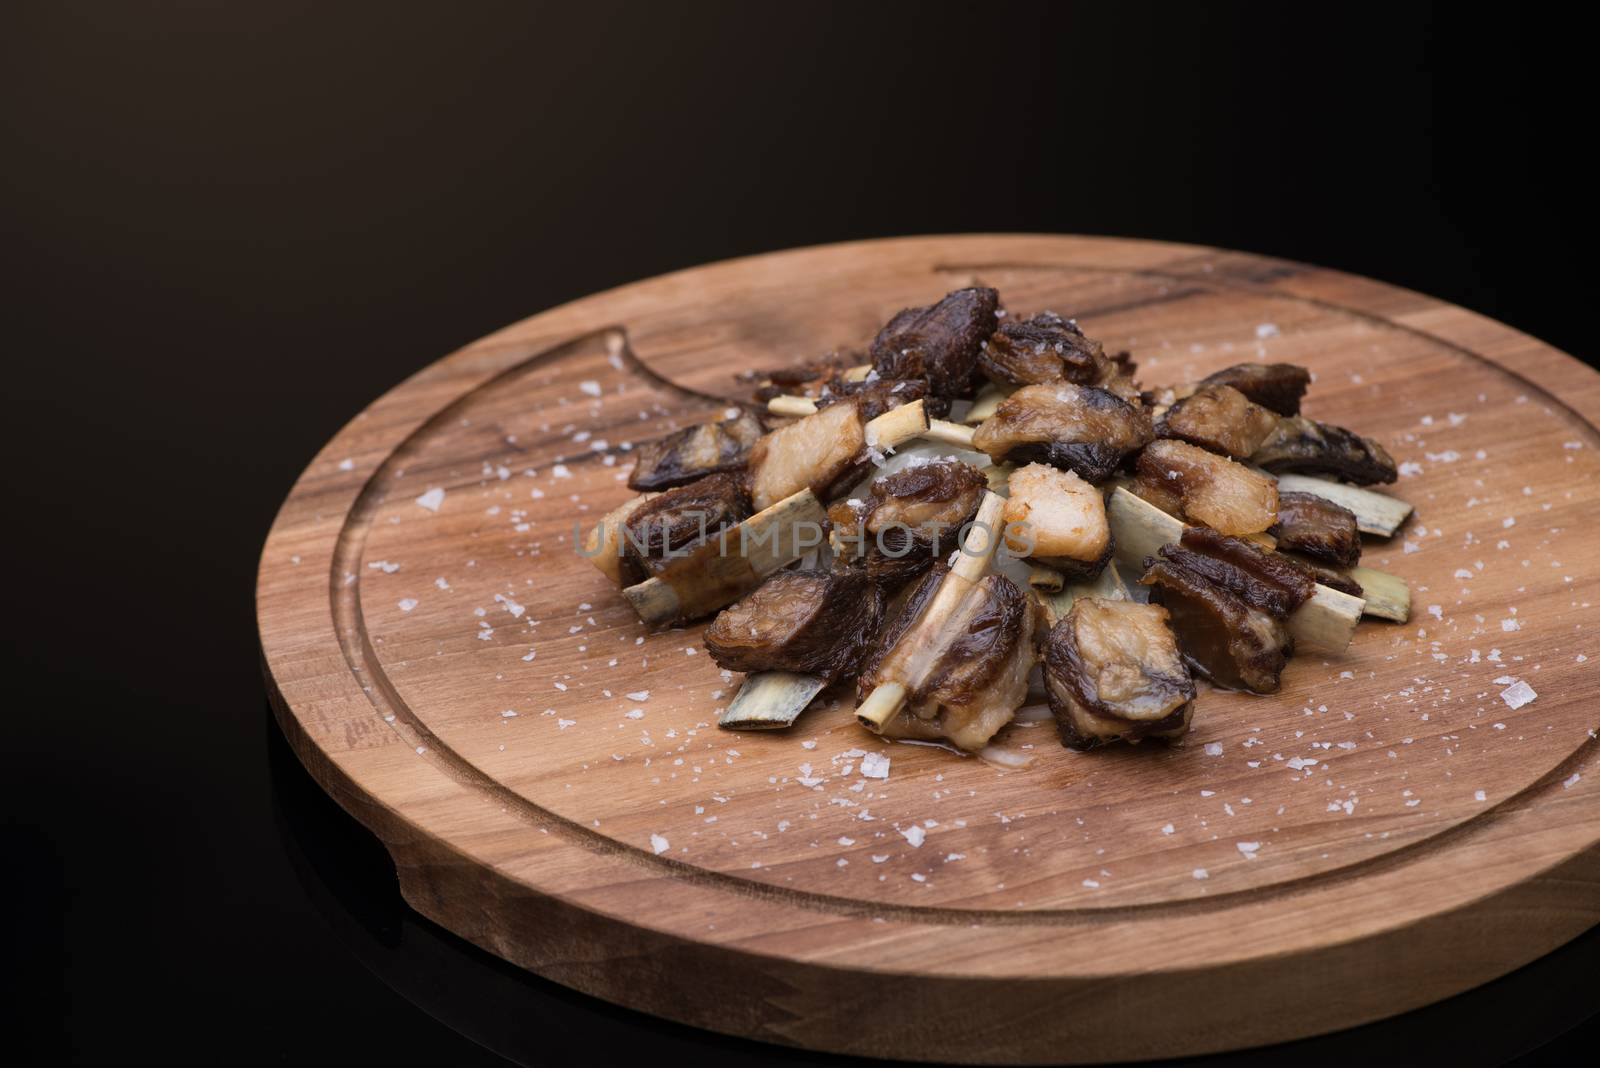 roast meat with bone on a wooden tray, dark background, isolated